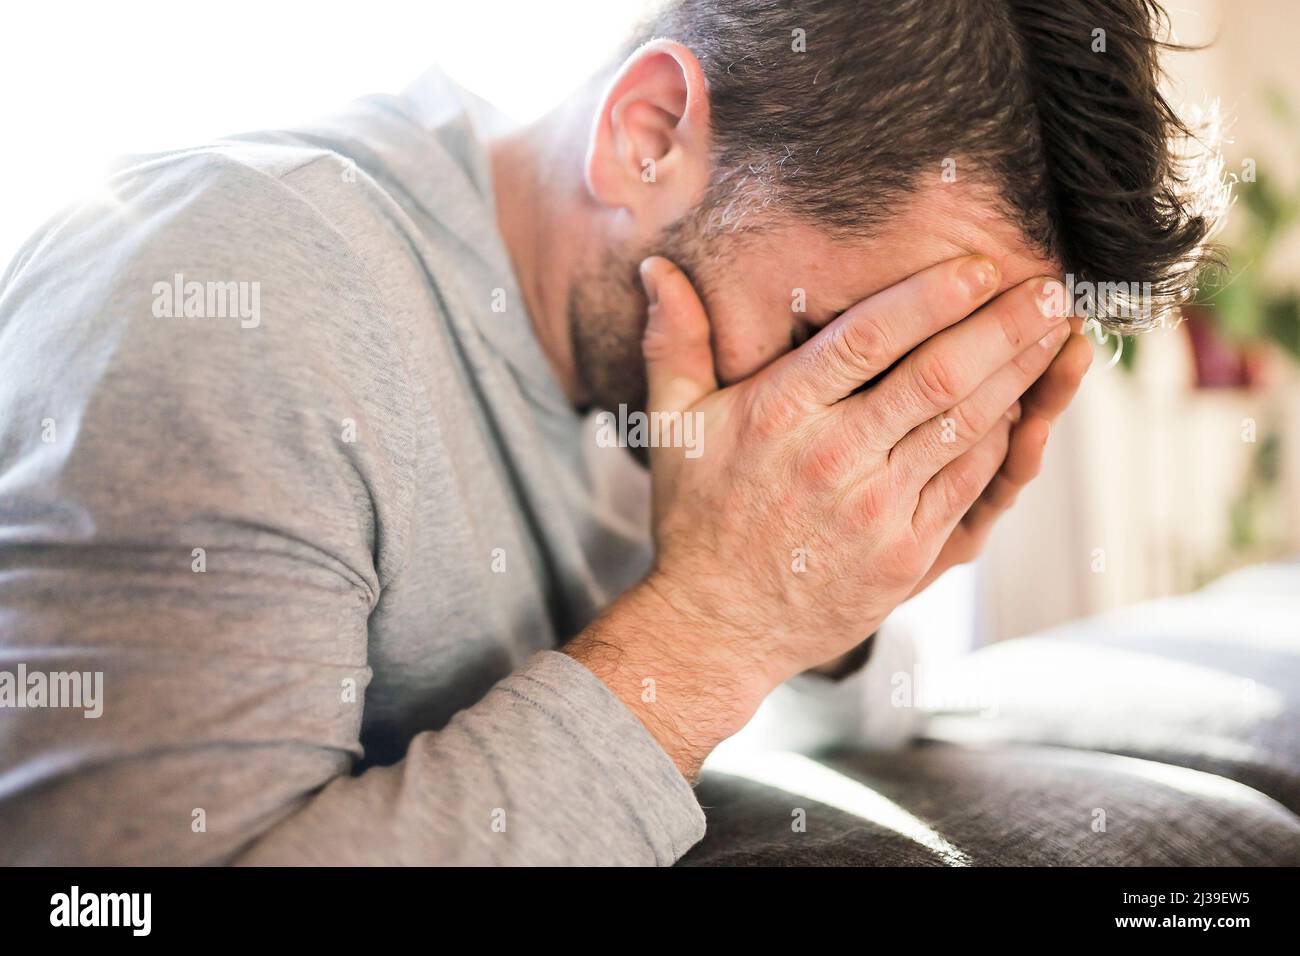 Depressed man at home on couch look sad Stock Photo